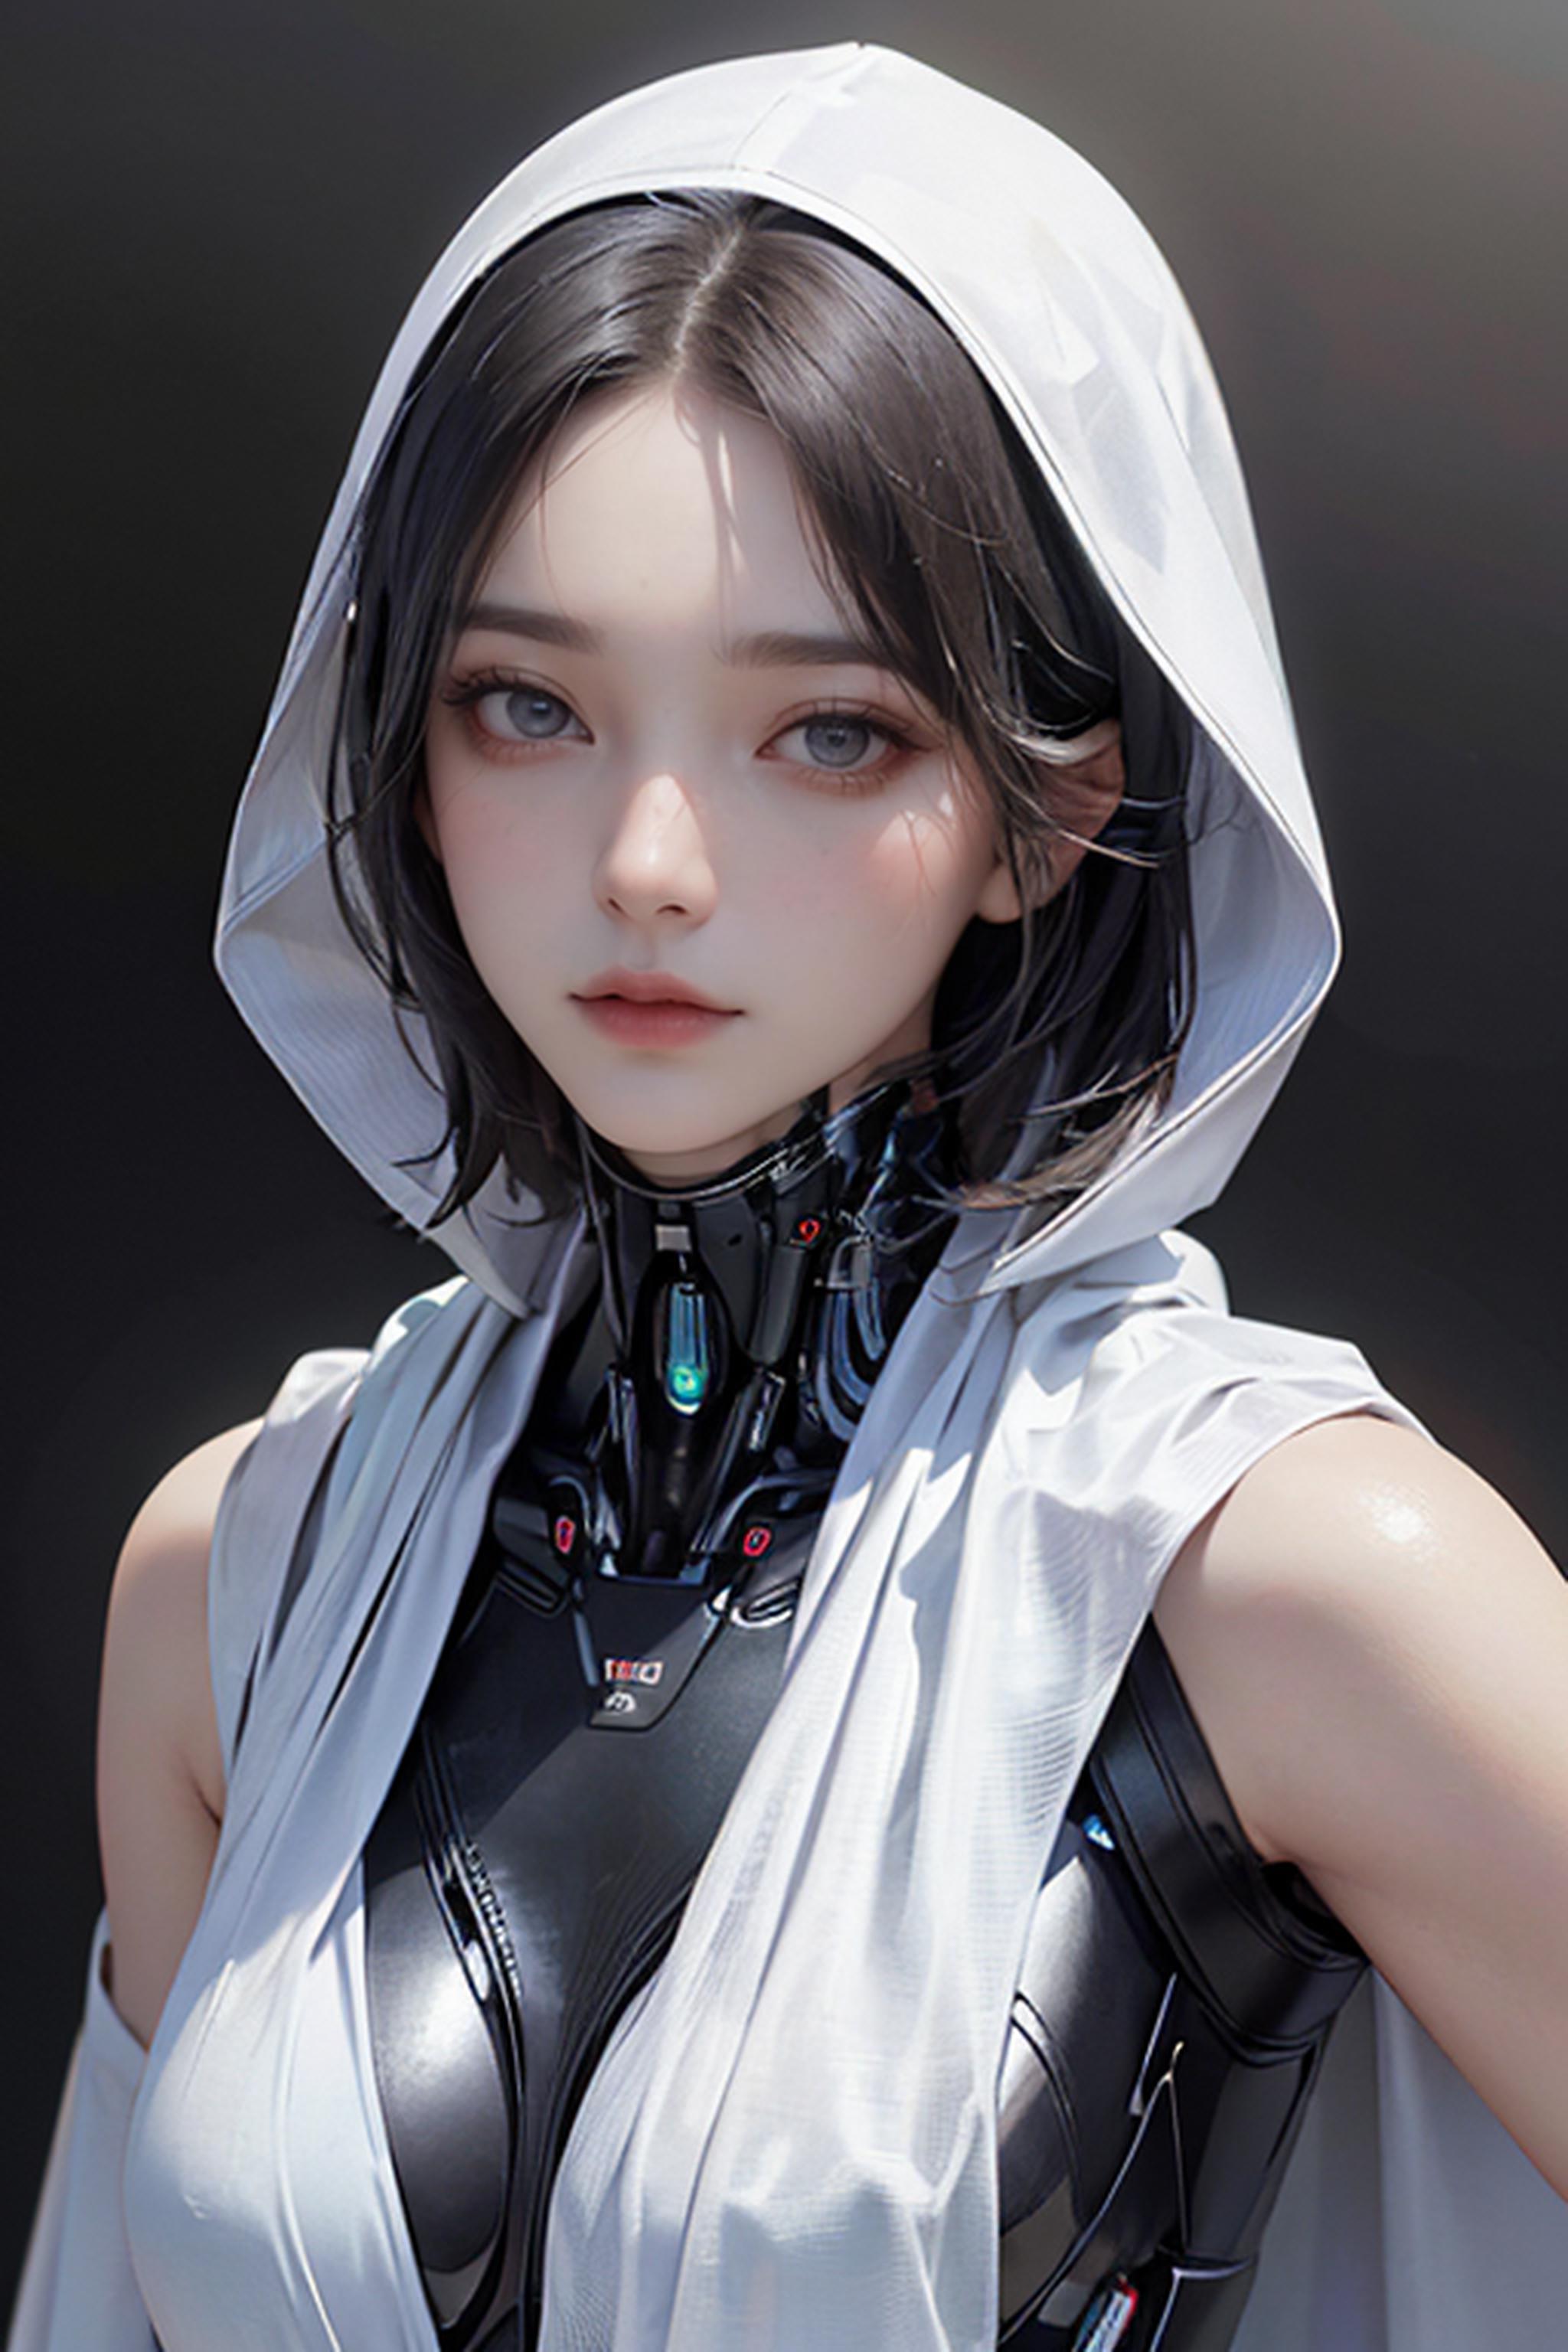 AI model image by zmall